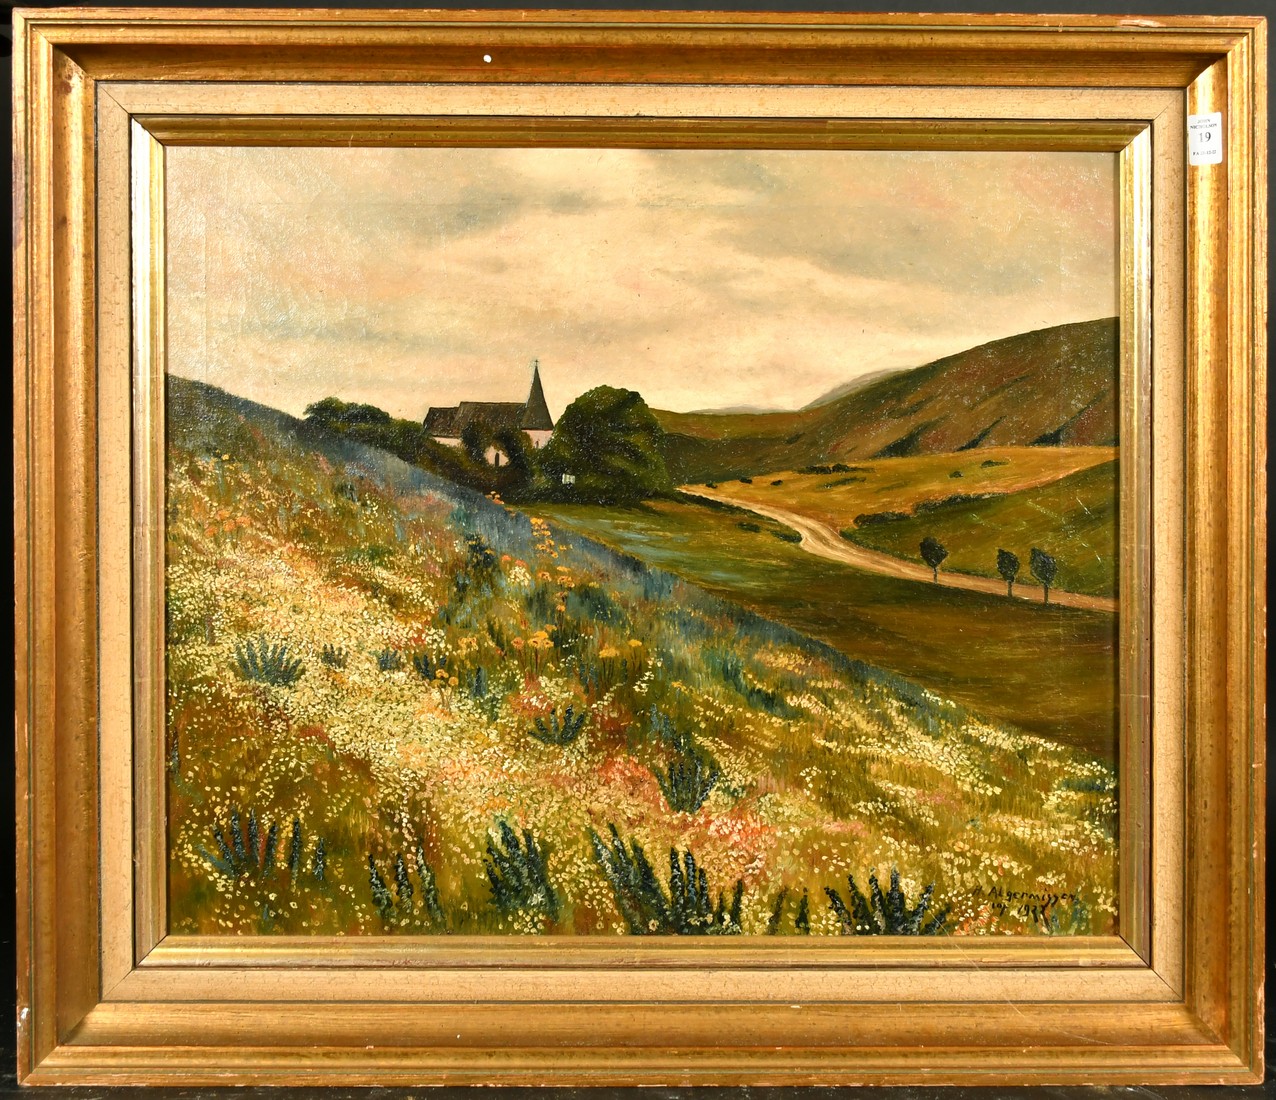 H. Algermissen, circa 1922, wildflowers in a landscape with a church beyond, oil on canvas, signed - Image 2 of 4